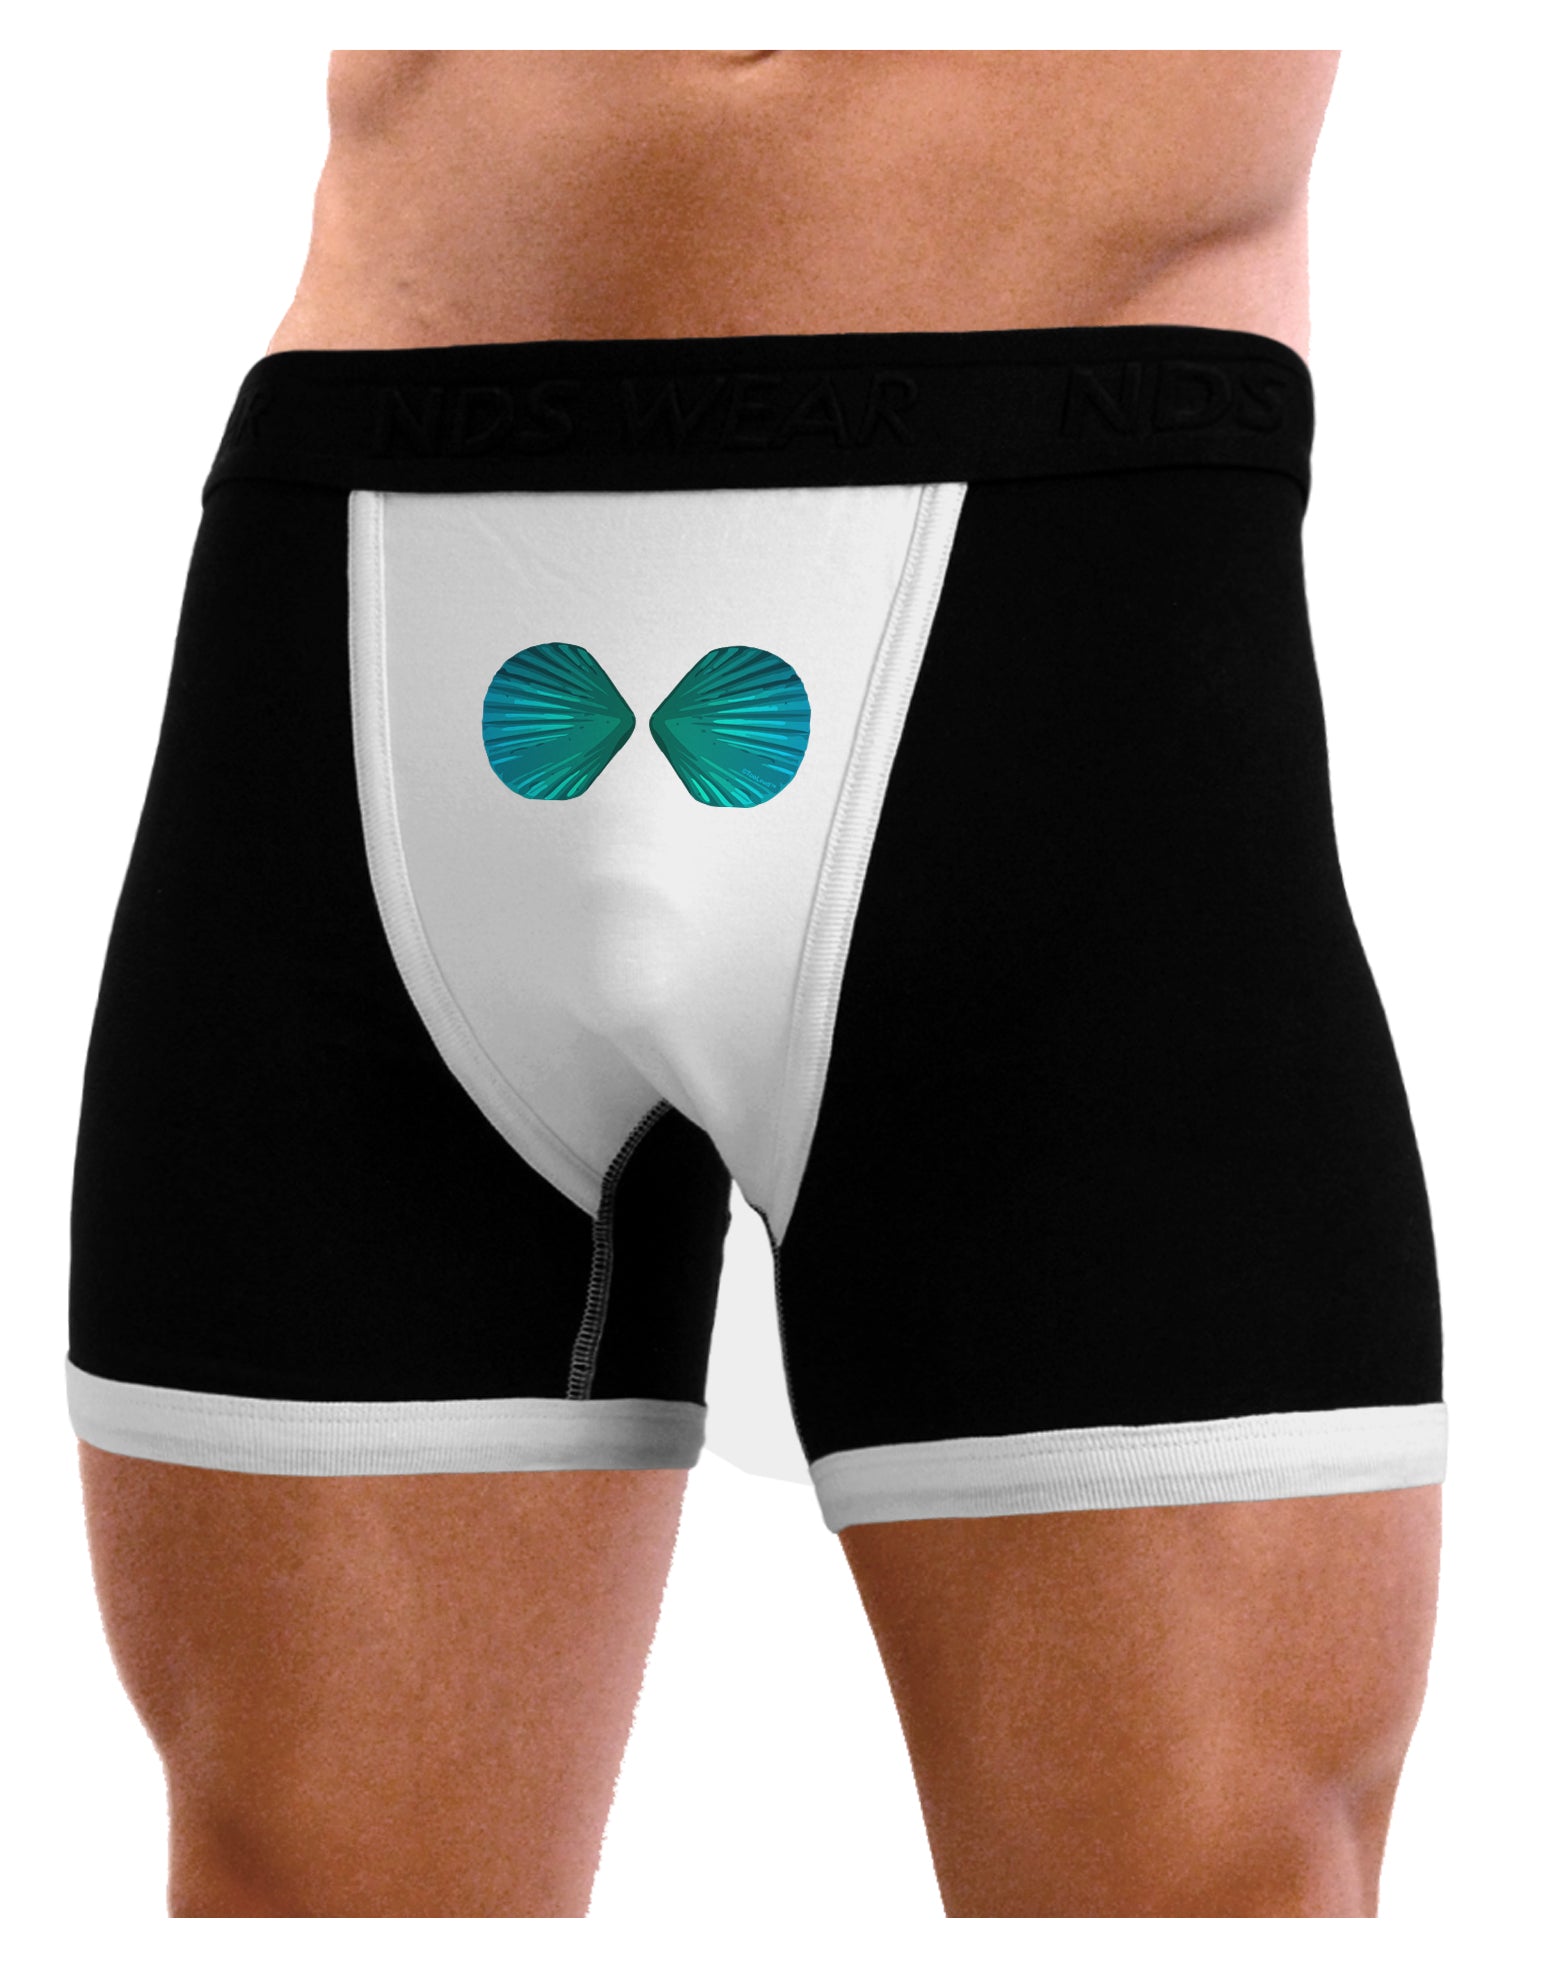 Cute Chick with Bow Mens Boxer Brief Underwear by TooLoud - NDS WEAR